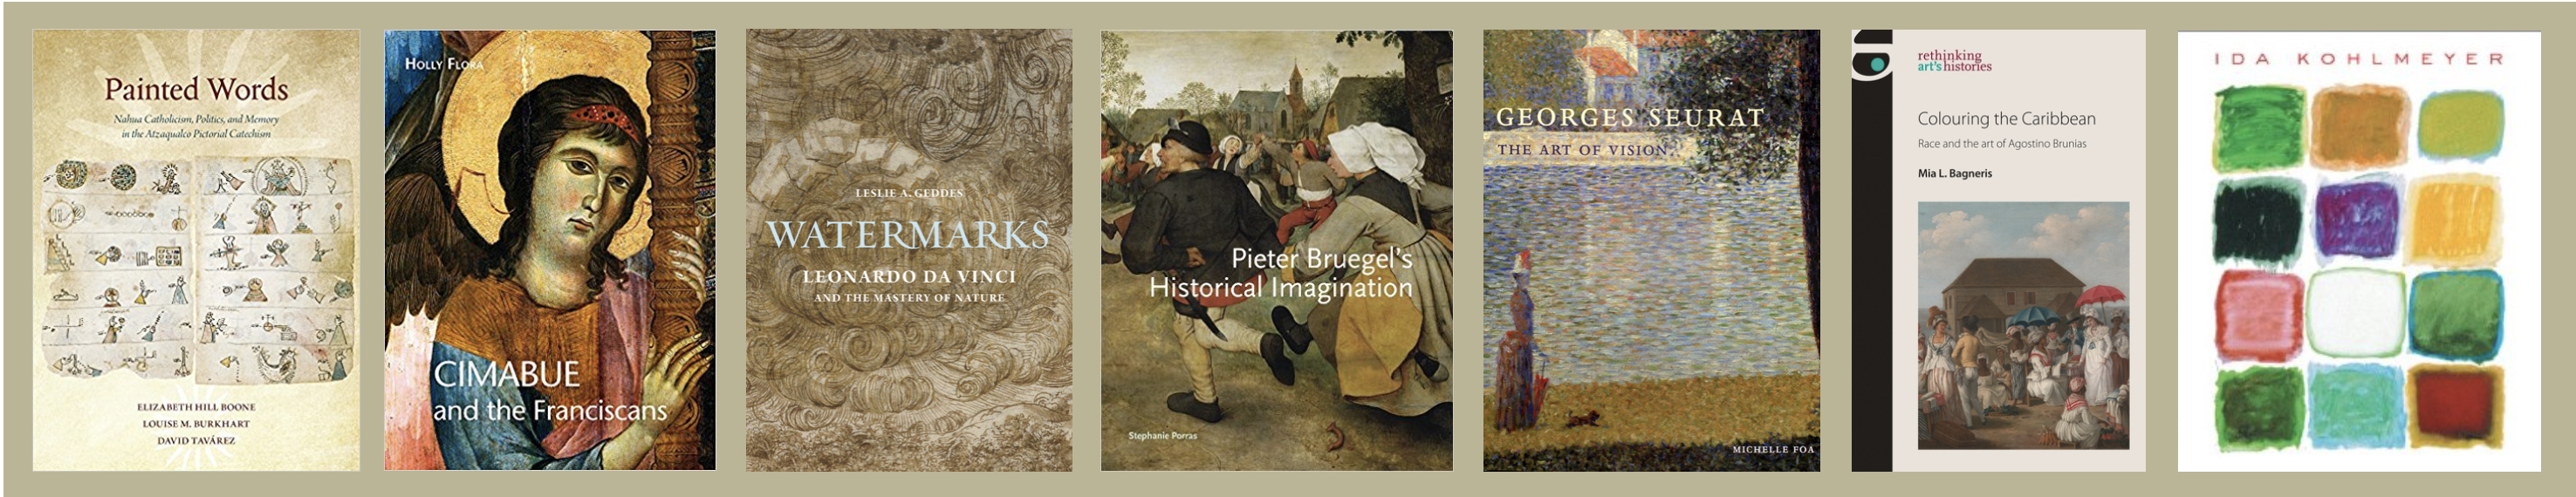 Art History Faculty book covers